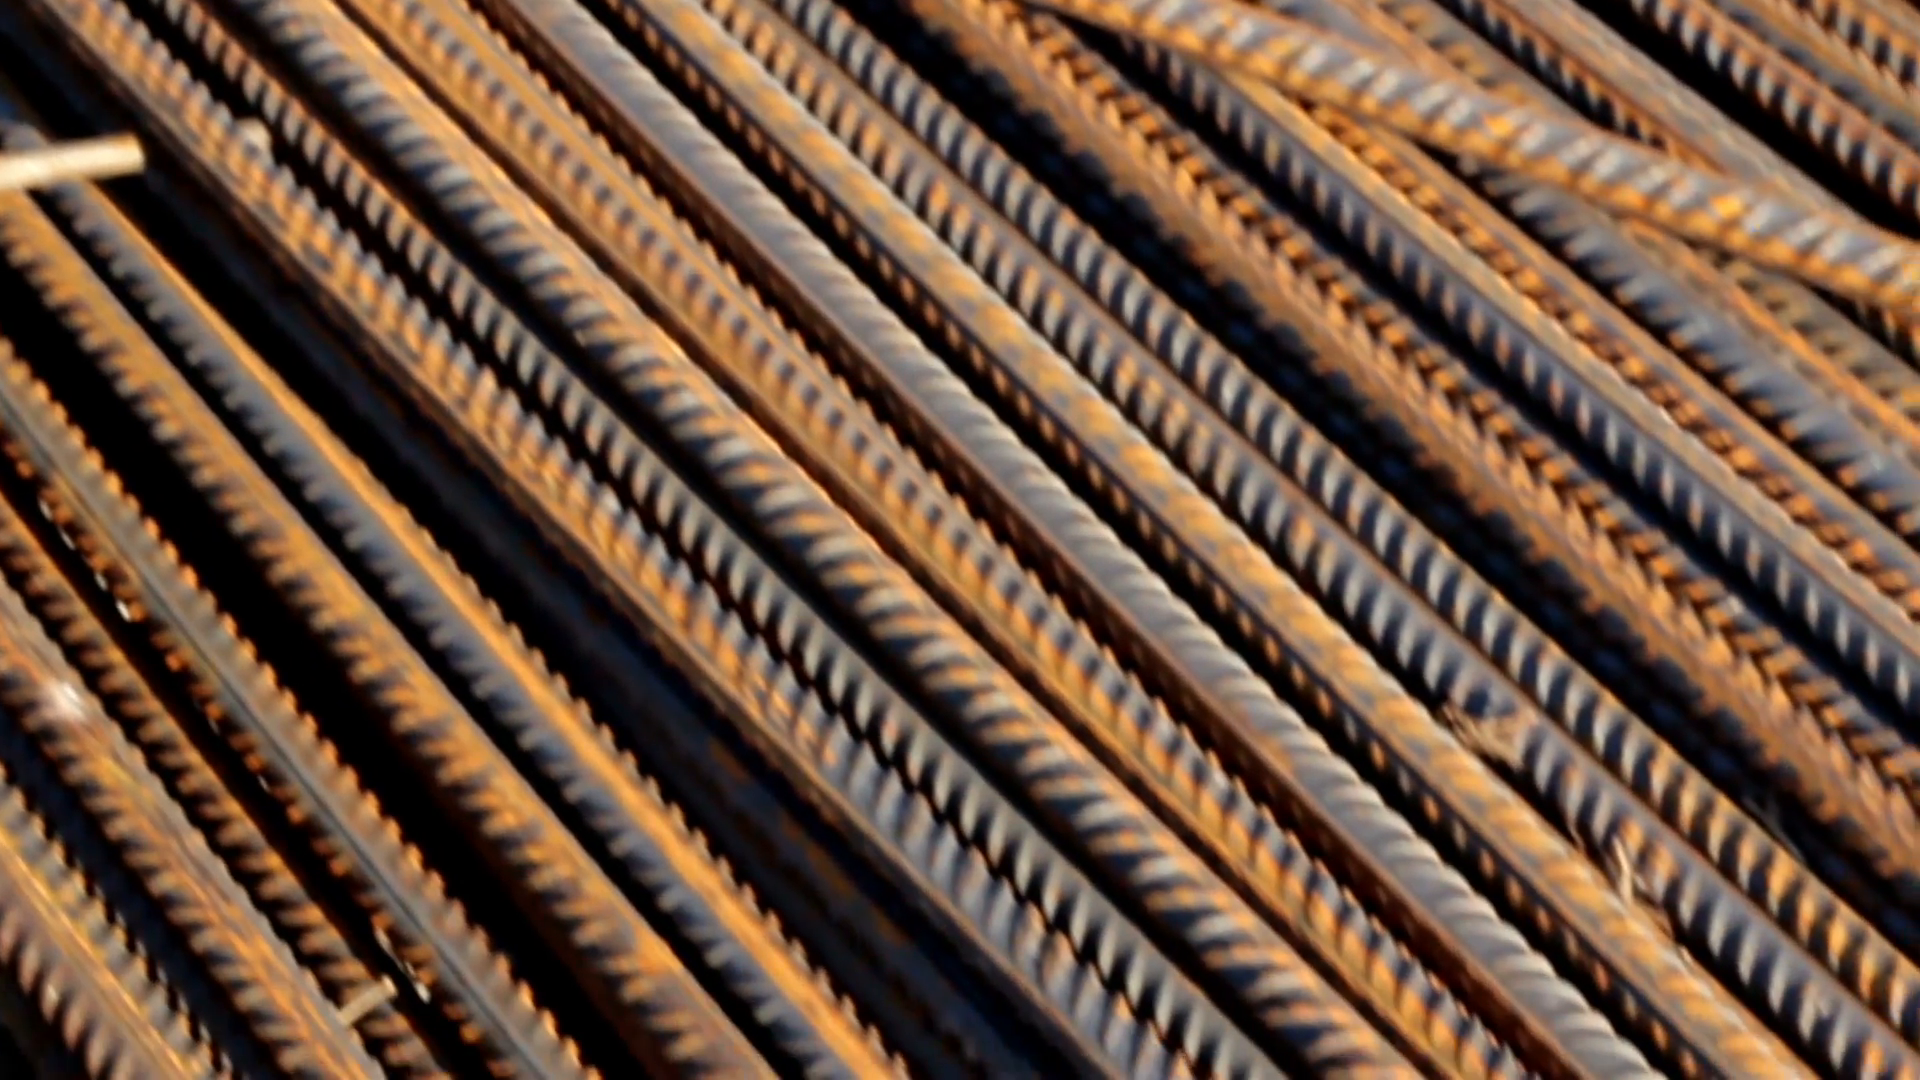 Rusty Round Bars Completely Piled Stock Video Footage - Videoblocks